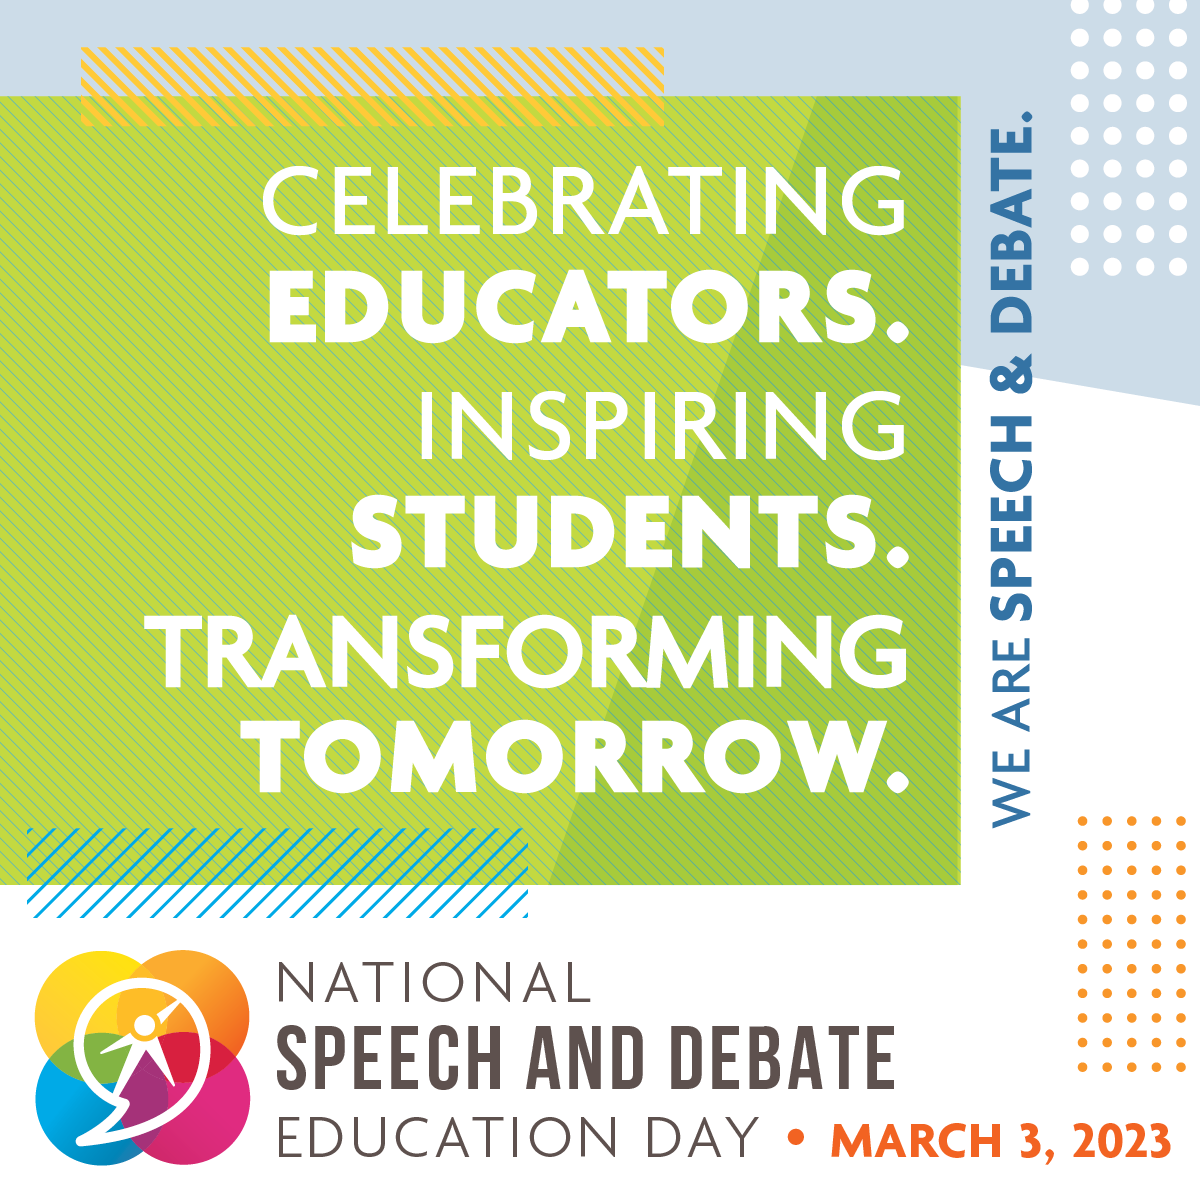 2023 National Speech and Debate Education Day Celebrating